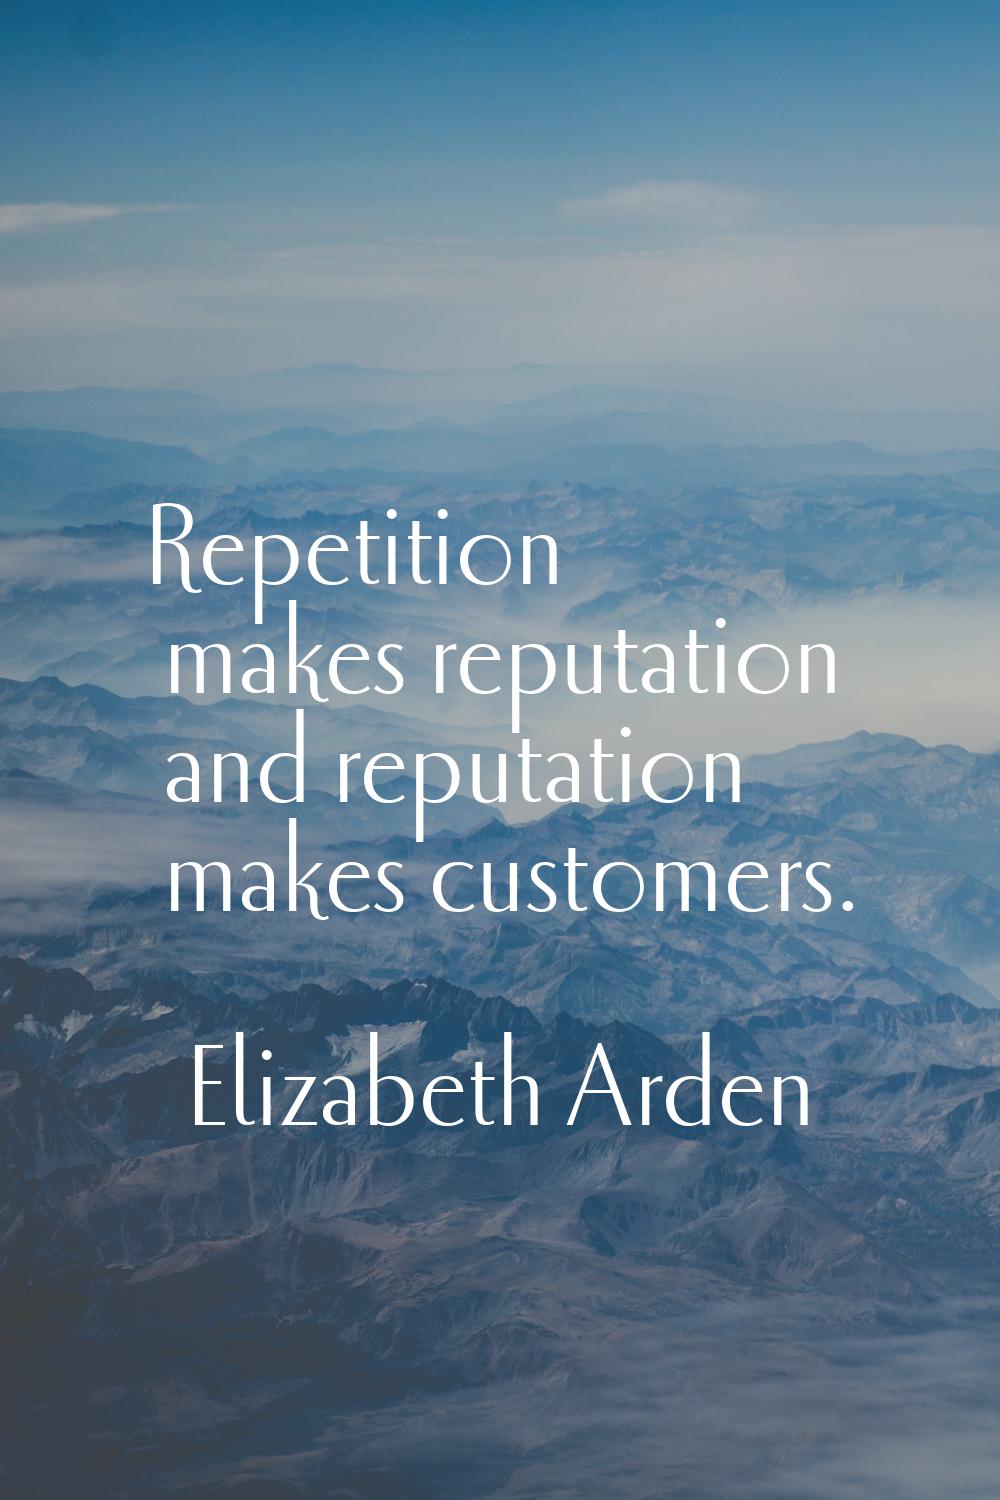 Repetition makes reputation and reputation makes customers.